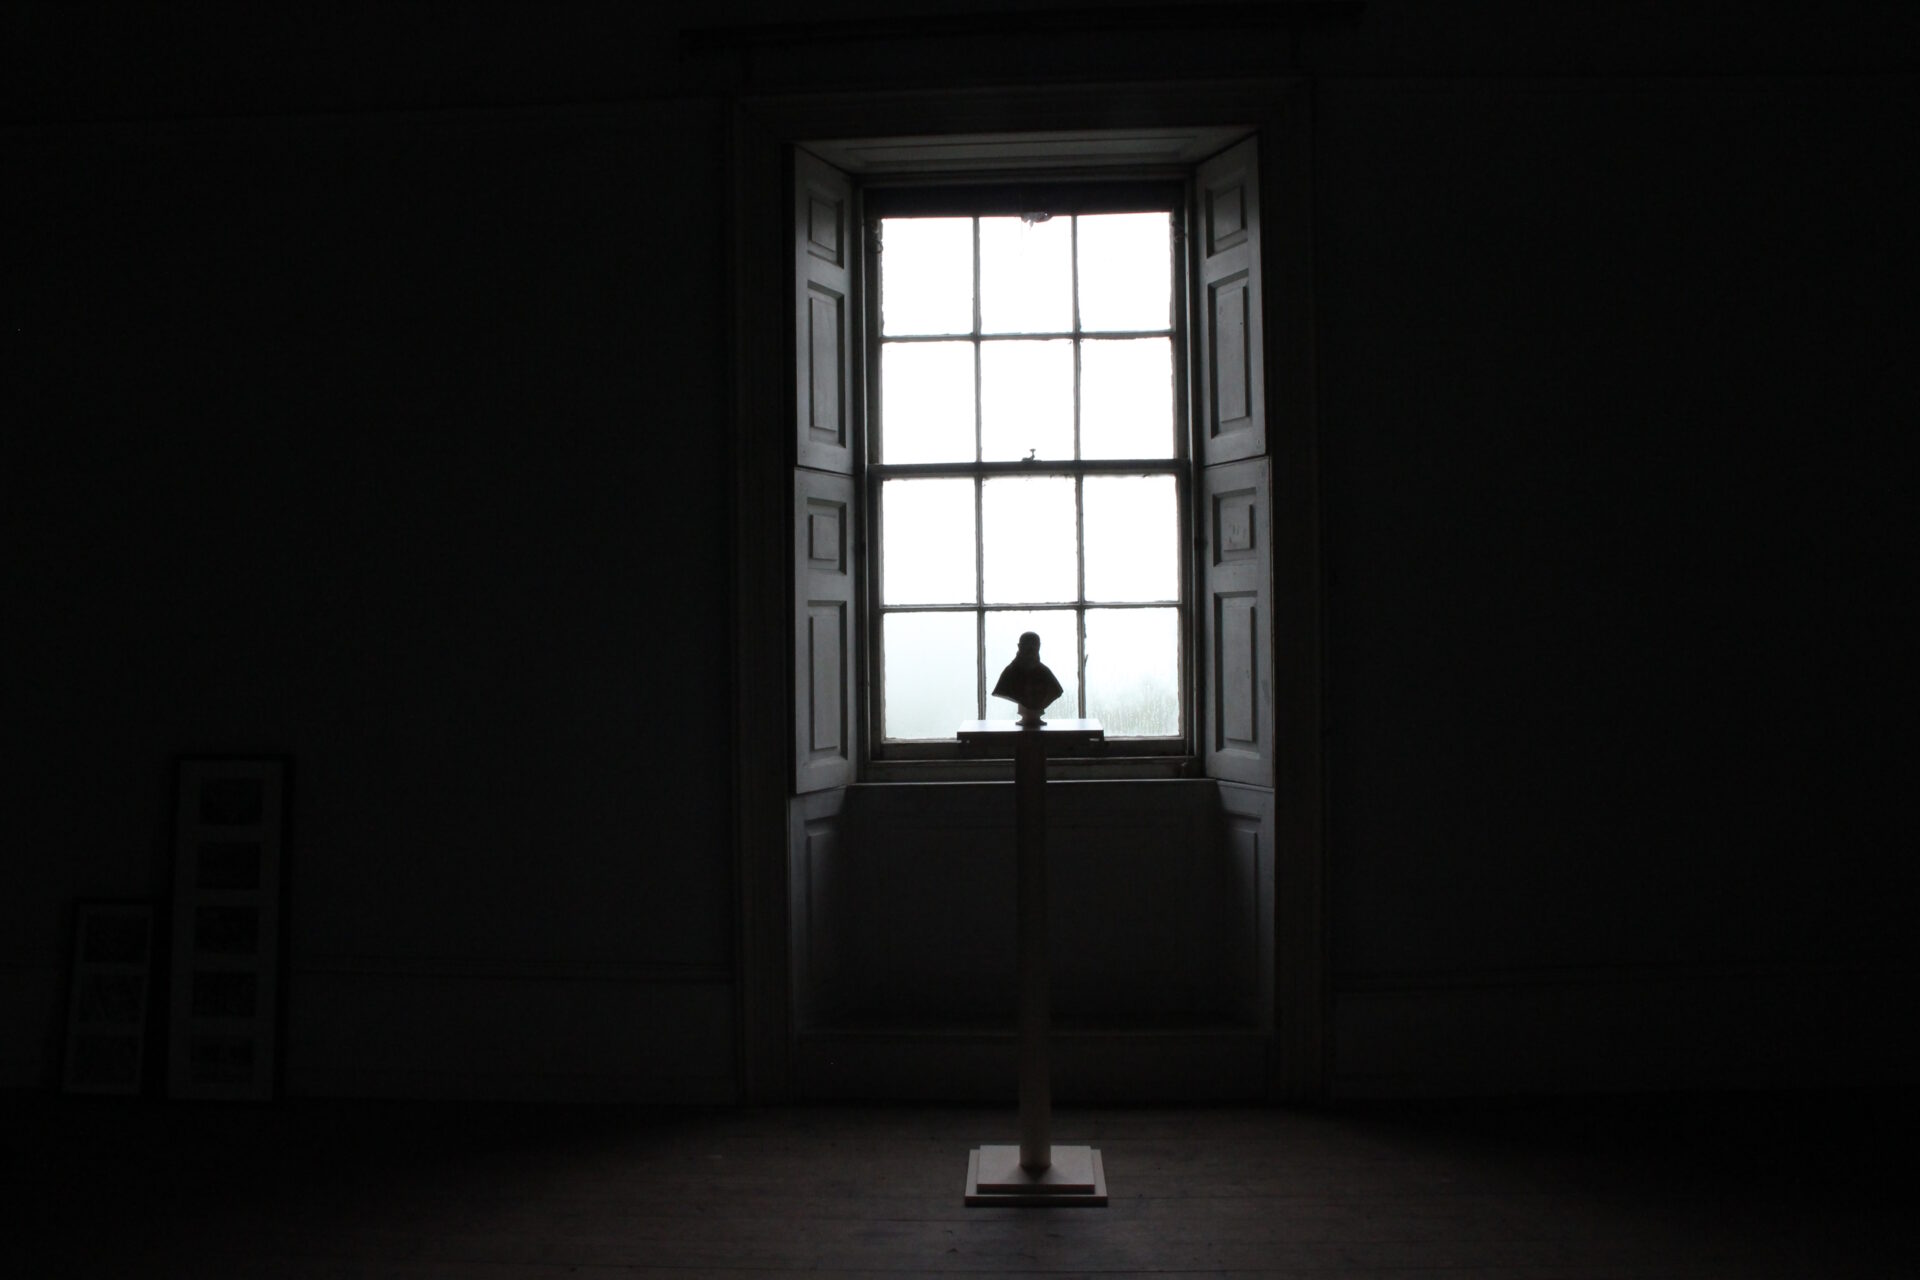 Bust on a pedestal against a window with natural light in a darkened room.